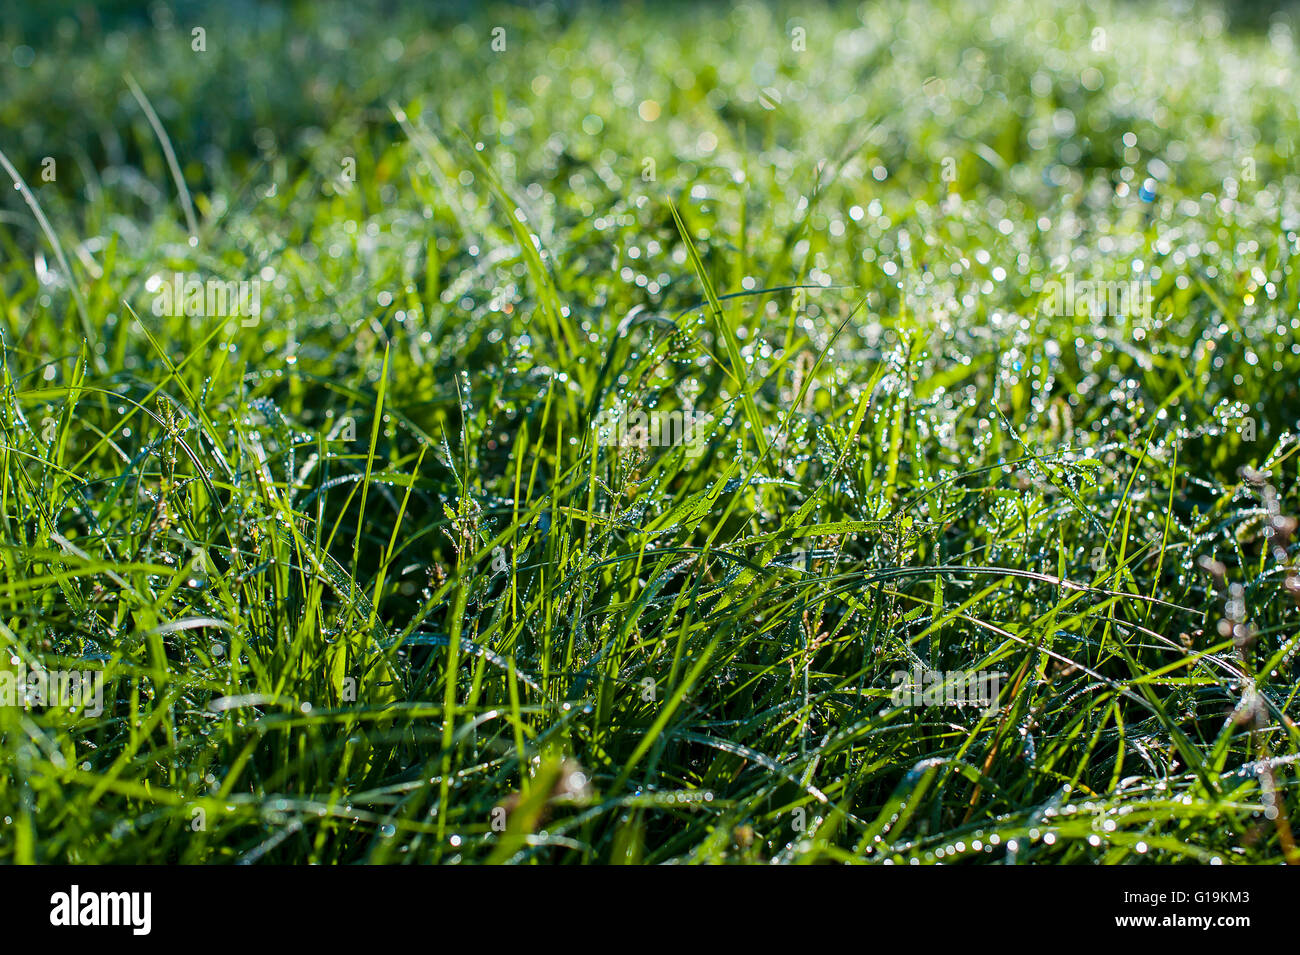 drops of dew on a green grass Stock Photo